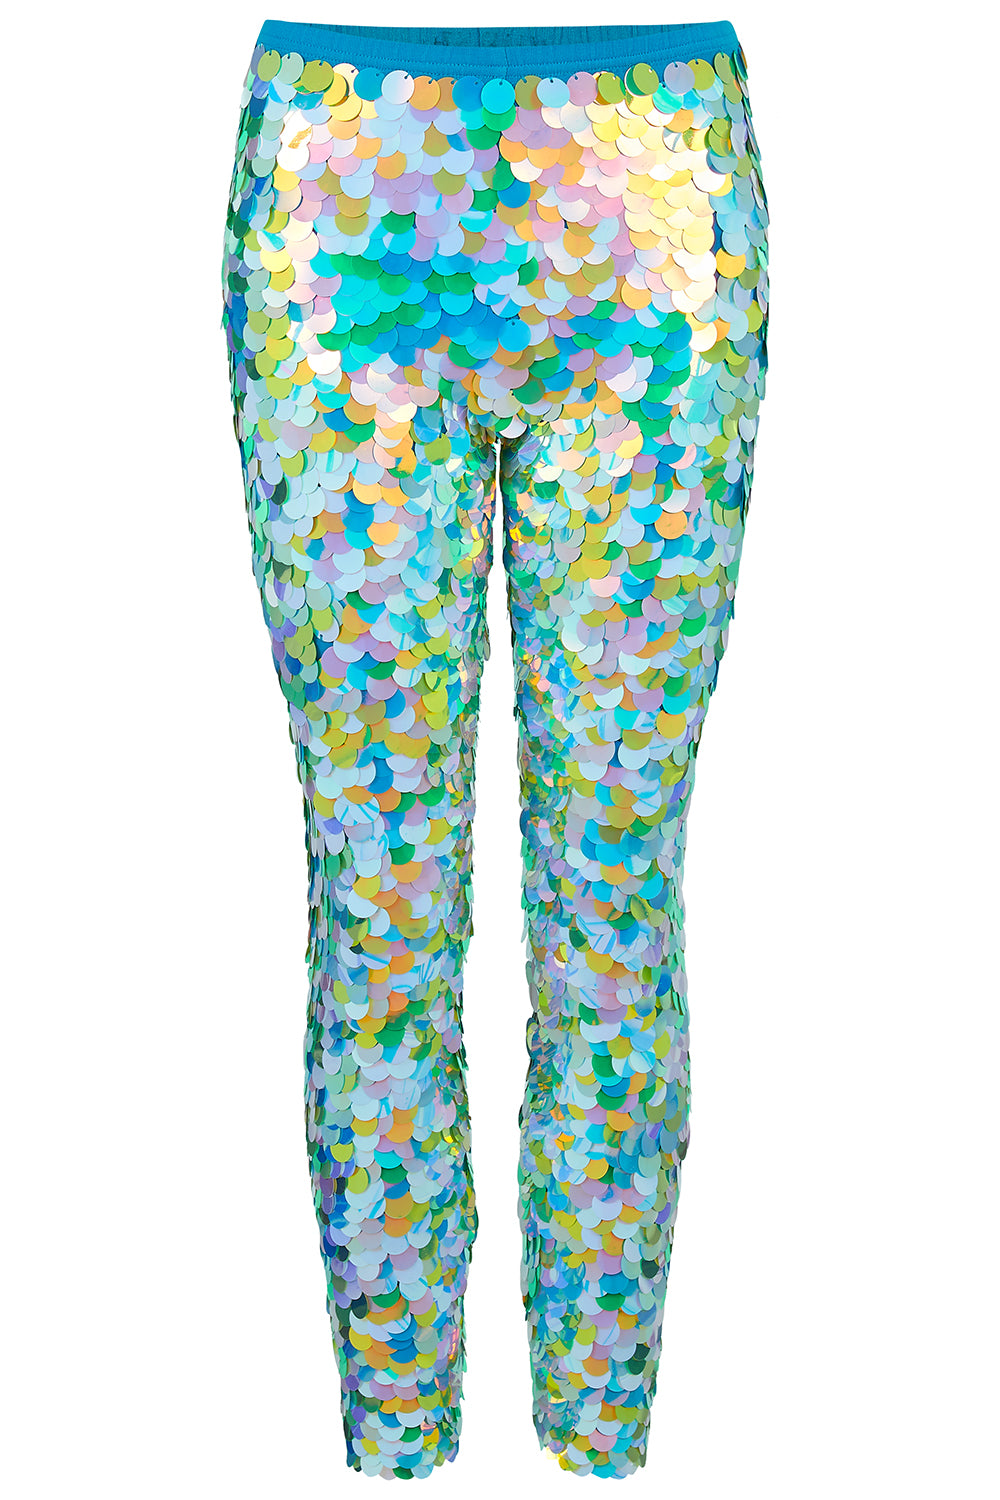 Blue and green sequin leggings